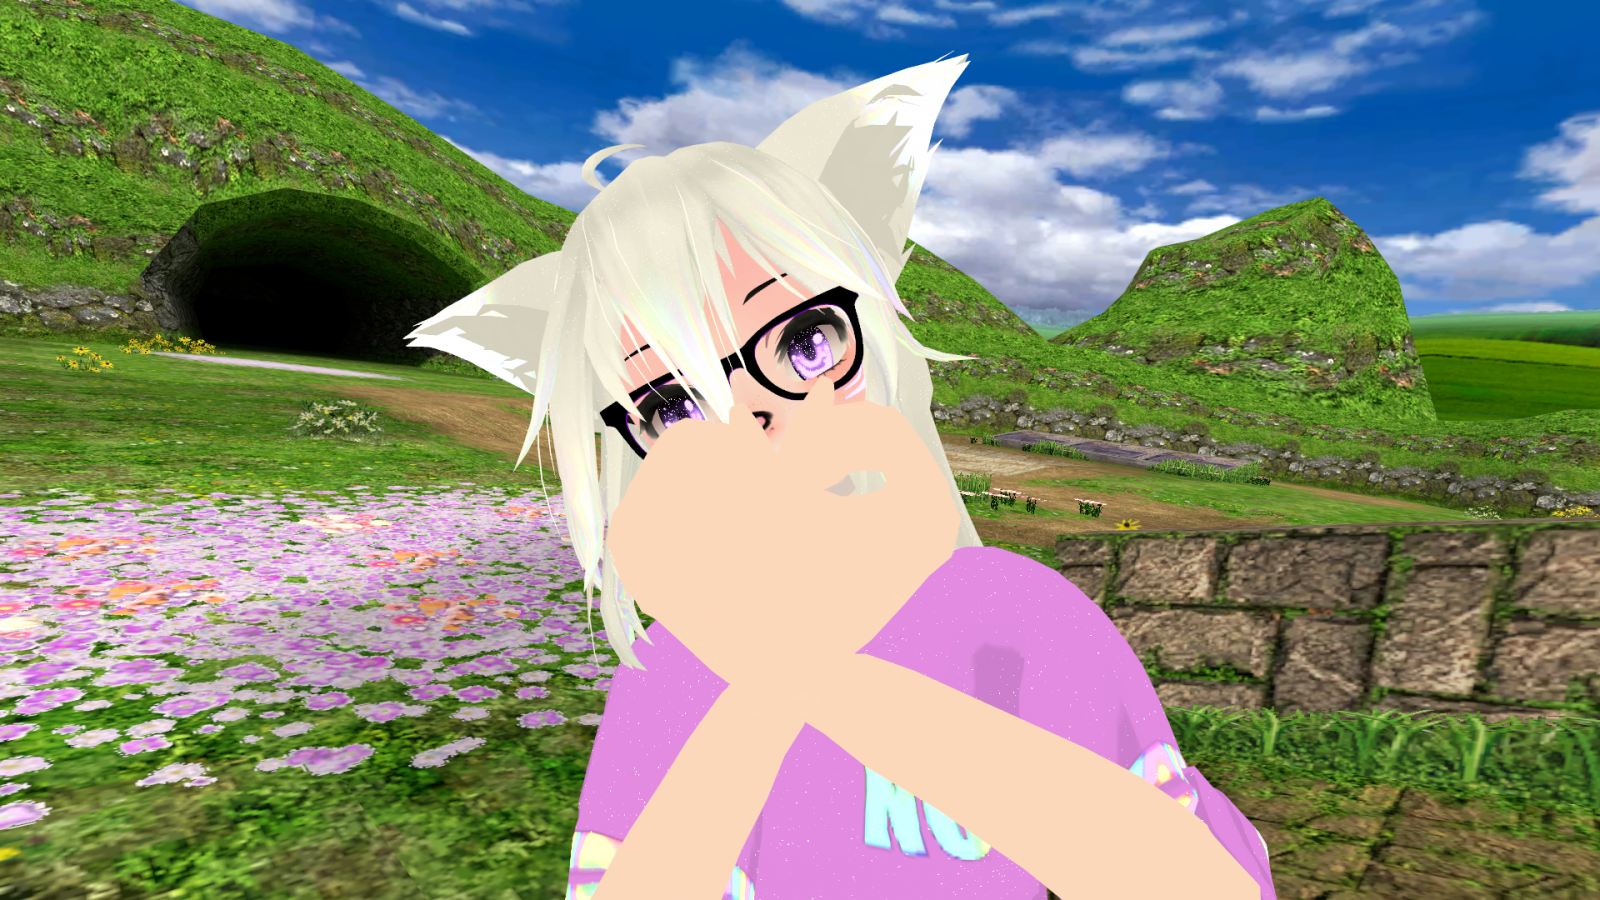 VRChat_1920x1080_2020-04-29_22-39-21.702.png